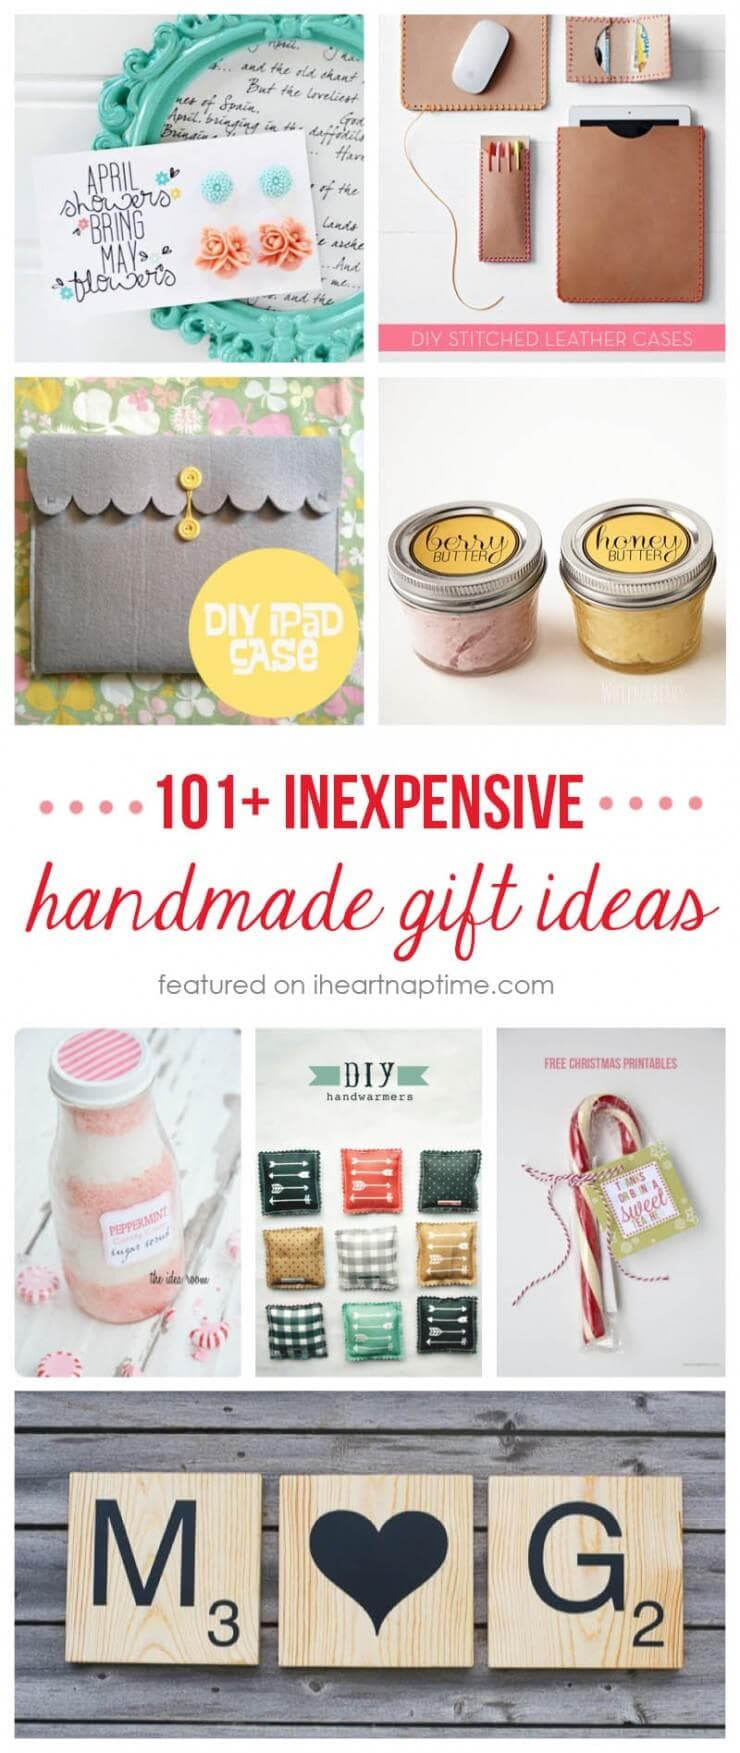 Simple DIY Christmas Gifts
 50 homemade t ideas to make for under $5 I Heart Nap Time